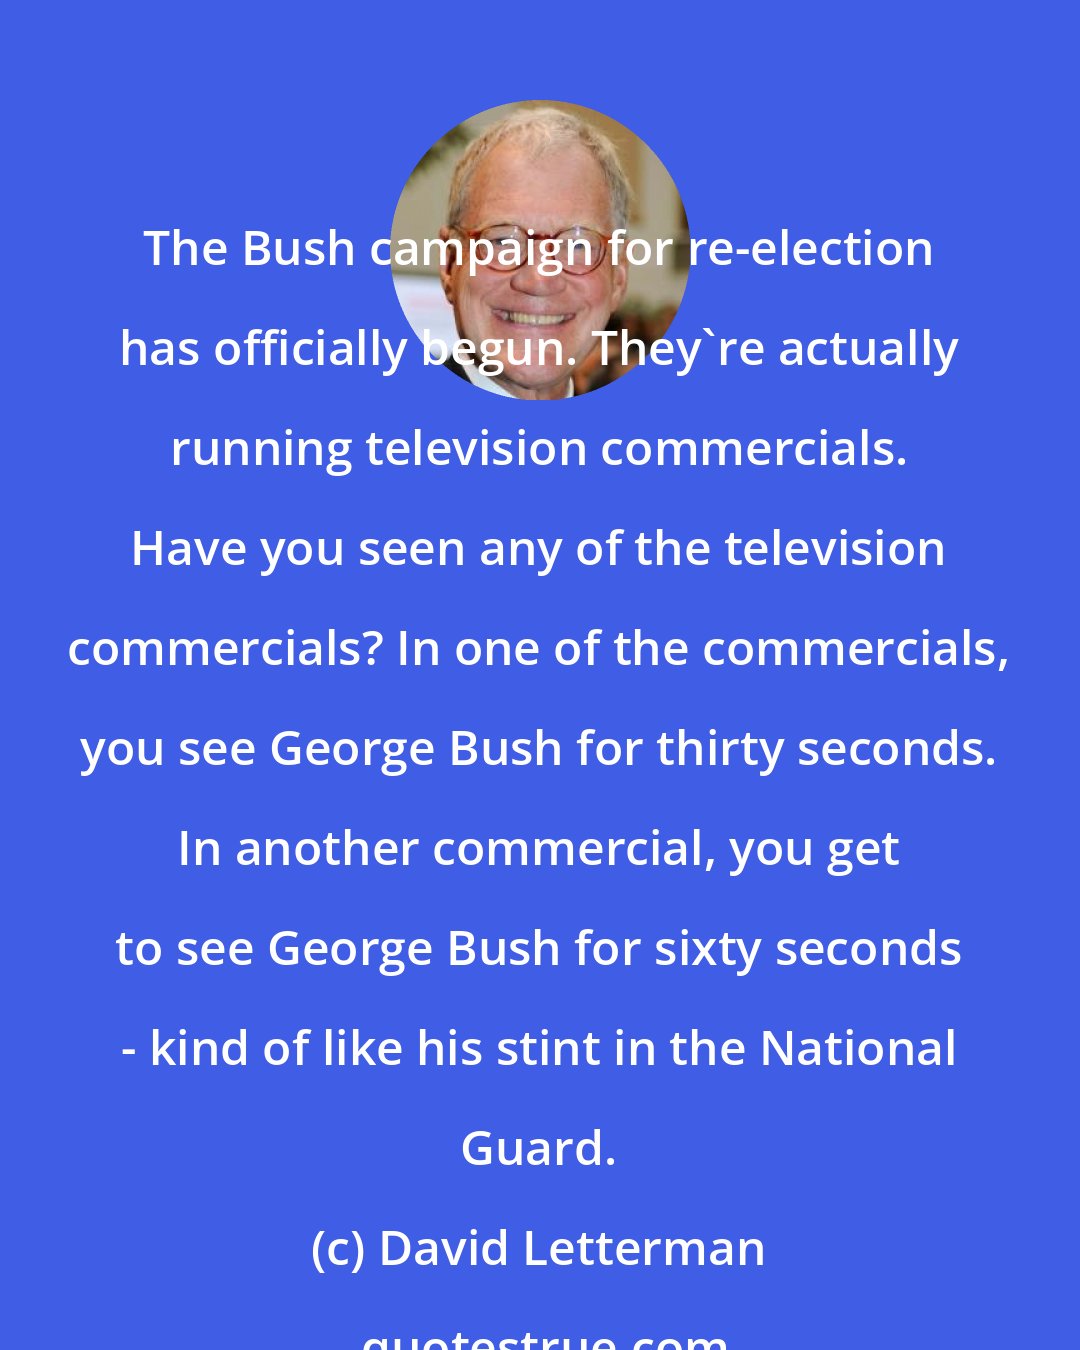 David Letterman: The Bush campaign for re-election has officially begun. They're actually running television commercials. Have you seen any of the television commercials? In one of the commercials, you see George Bush for thirty seconds. In another commercial, you get to see George Bush for sixty seconds - kind of like his stint in the National Guard.